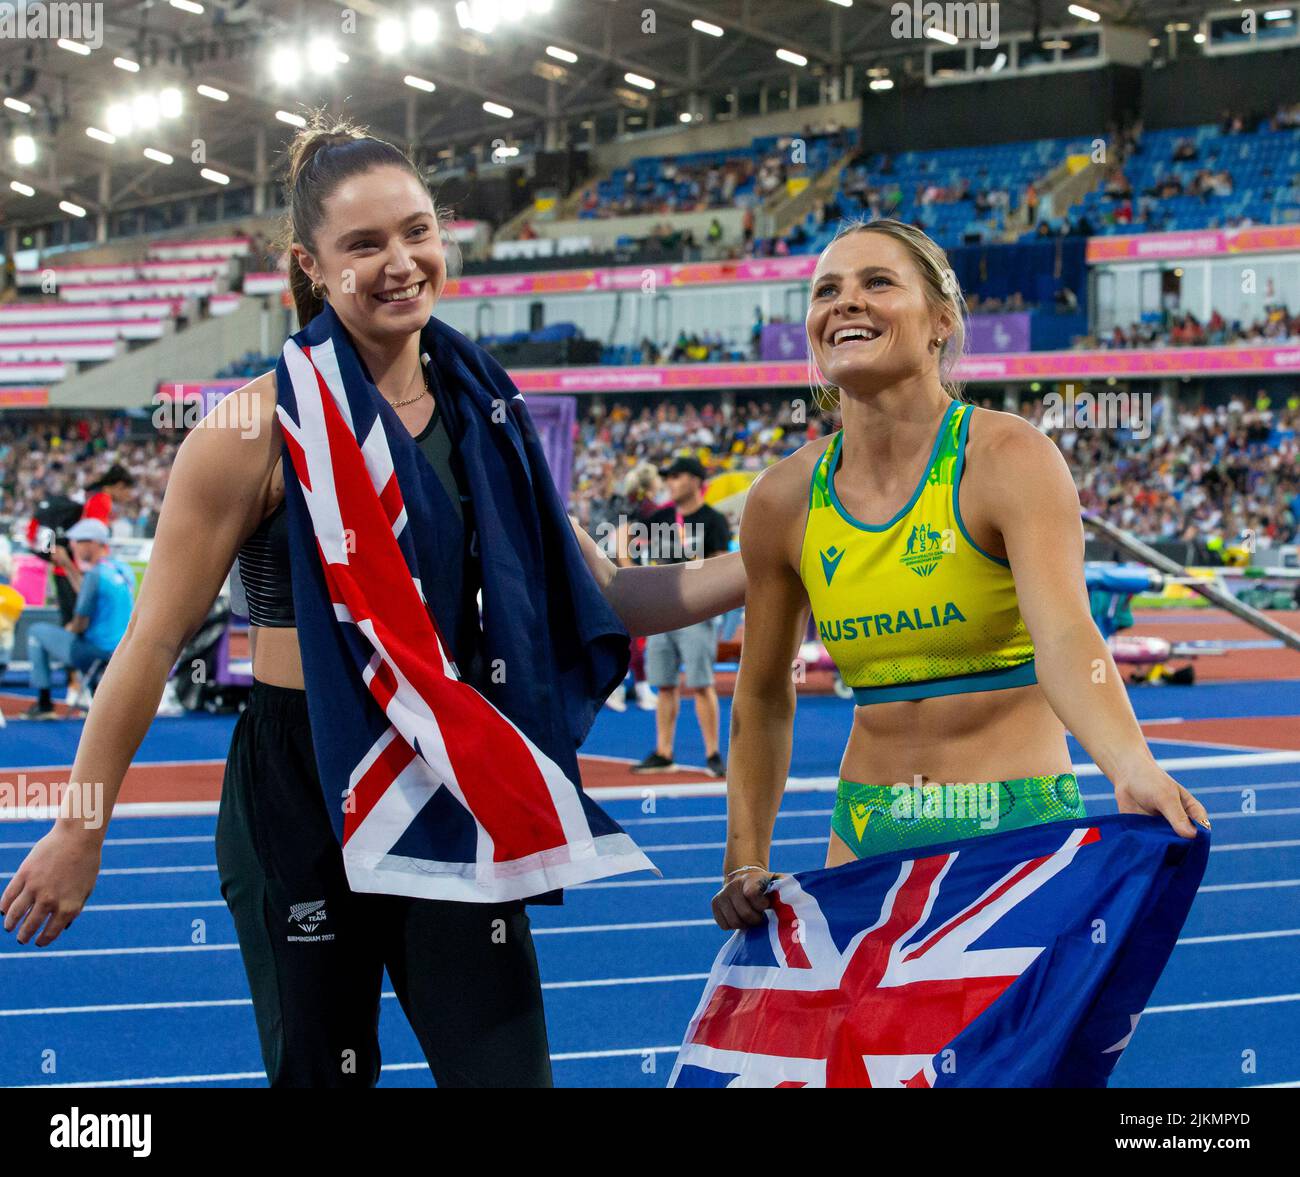 Birmingham, UK. 2nd August 2022; Alexander Stadium, Birmingham, Midlands, England: Day 5 of the 2022 Commonwealth Games: Nina Kennedy (AUS) with her national flag celebrates after winning the Gold Medal in the Pole Vault with a height of 4.60m alongside Imogen Ayris (NZL) who won the Bronze Medal with a height of 4.45m Credit: Action Plus Sports Images/Alamy Live News Stock Photo